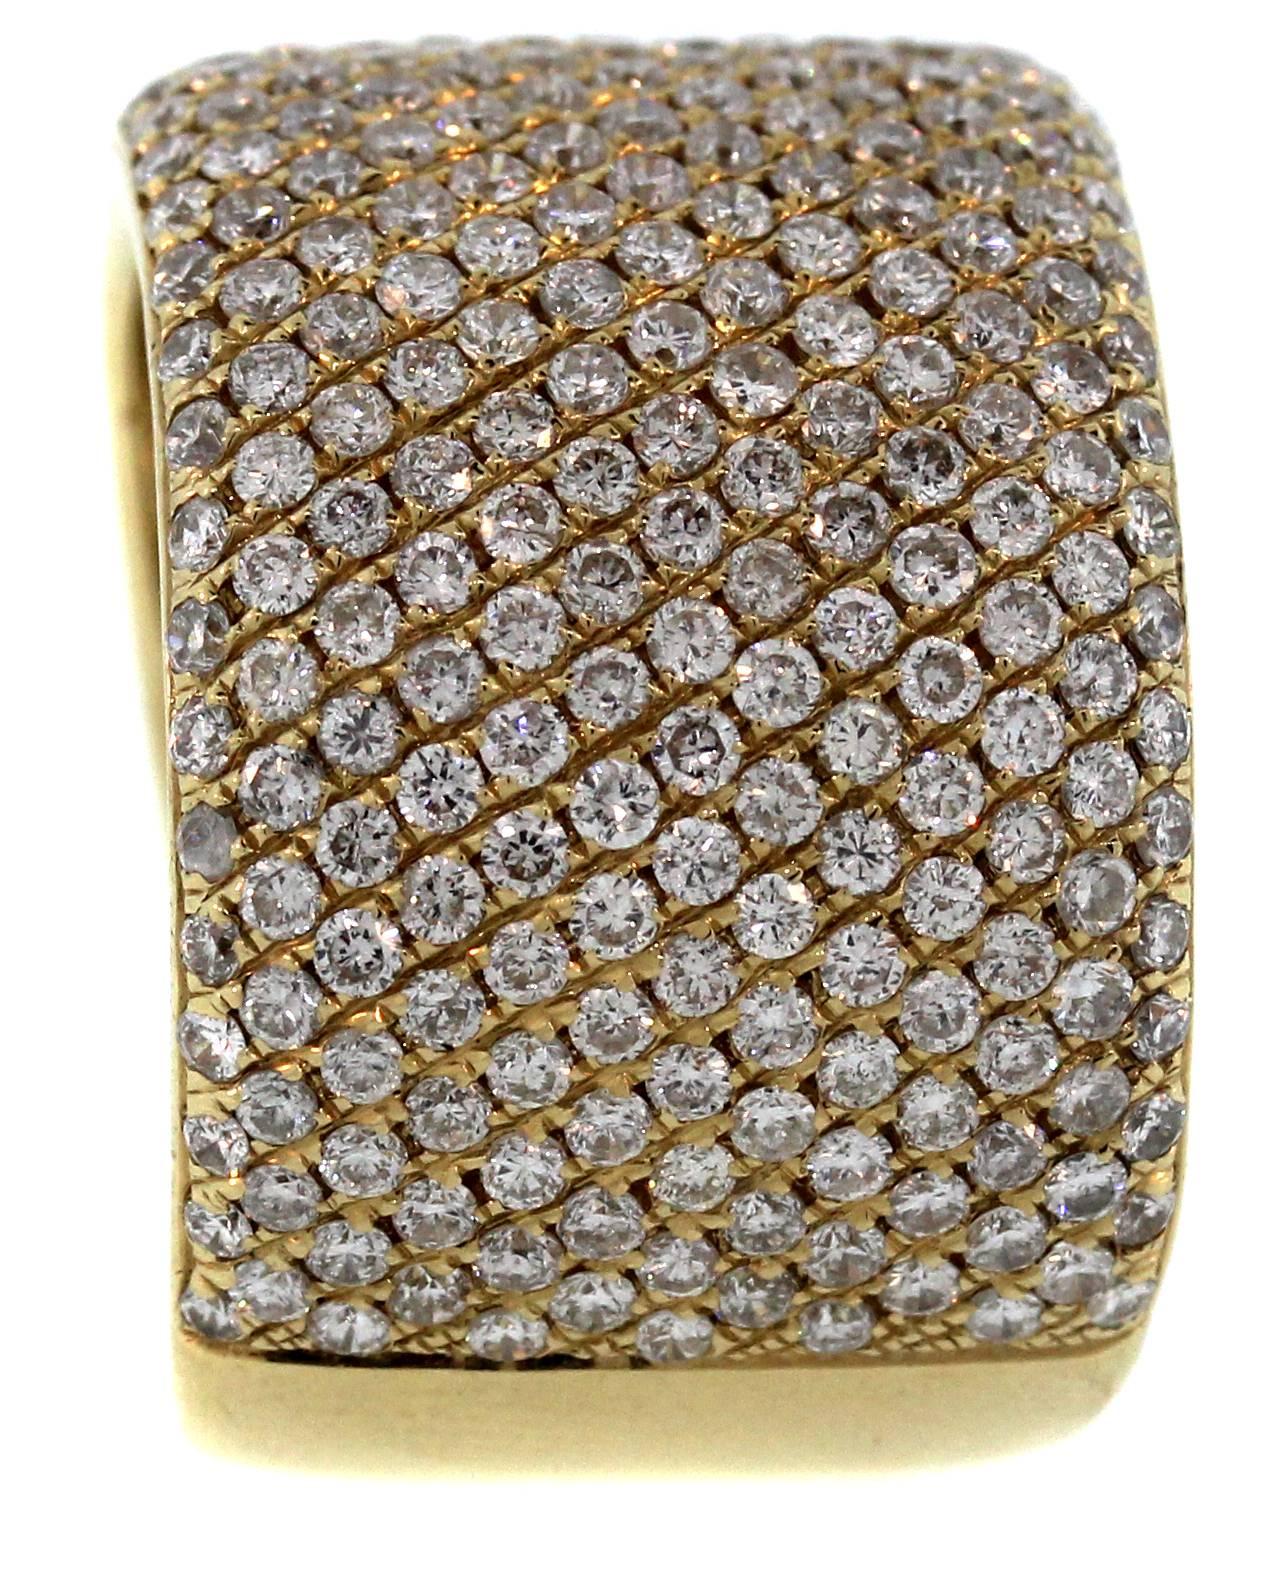 18K Yellow Gold Wide Band Ring with Diamonds

2.47ct. G Color, VS Clarity Diamonds

Diamonds are set on one side of band

Ring is 0.6 inch wide 

Size 7. Sizable